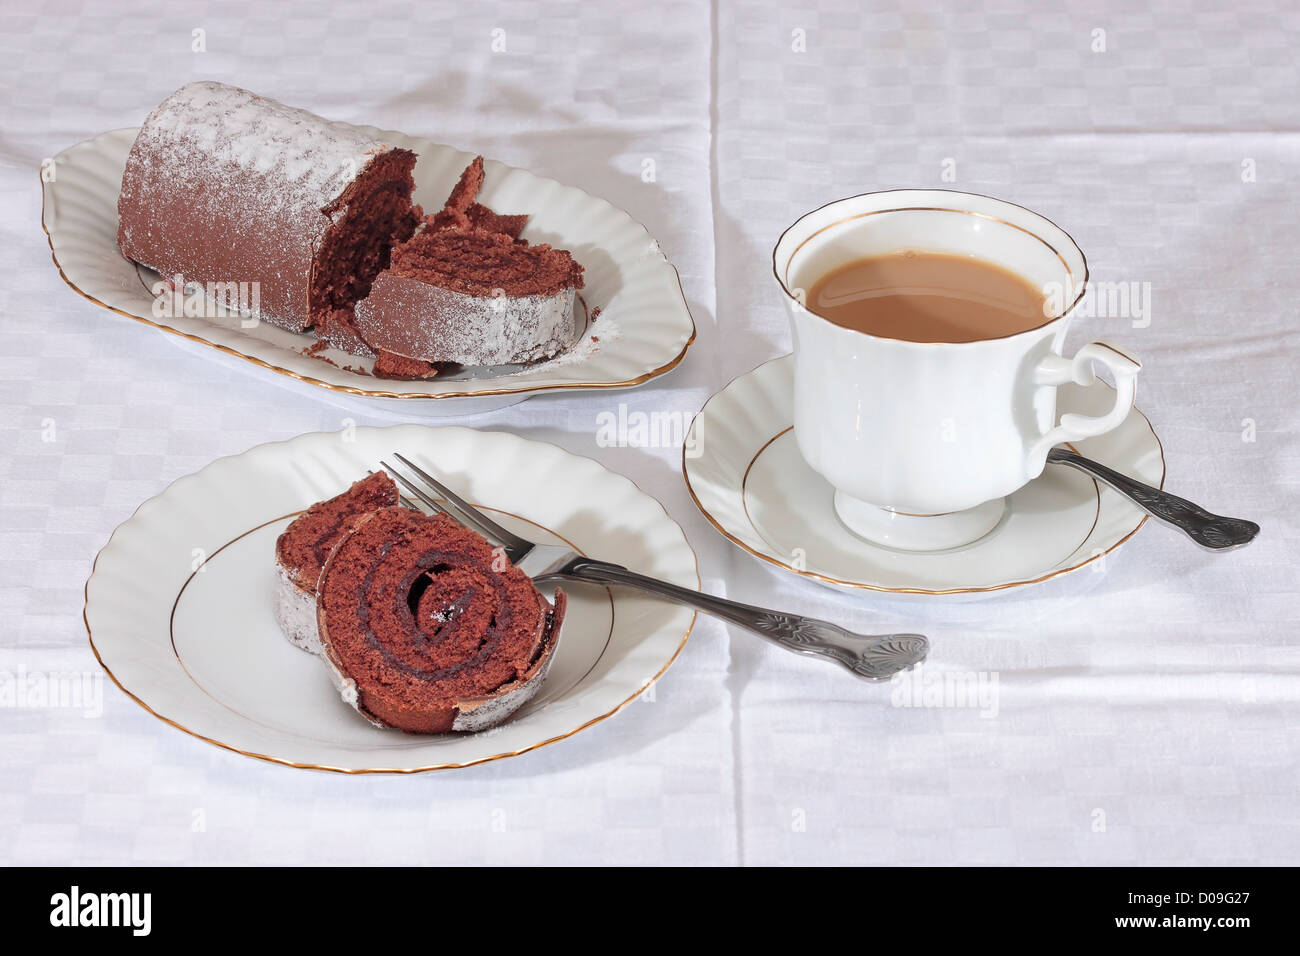 Cup of Tea and a Slice of Yule Log Stock Photo